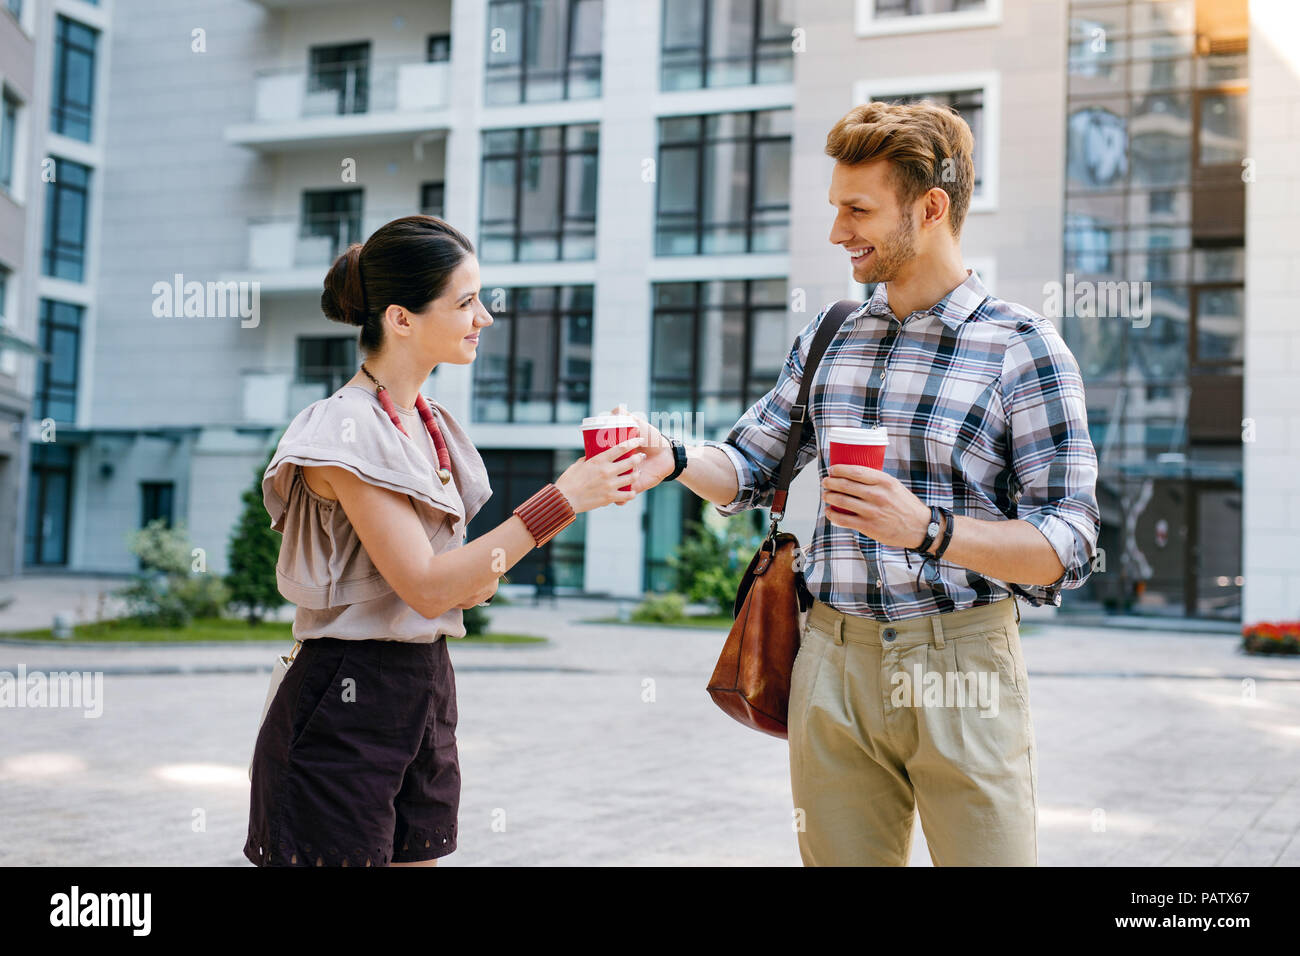 Pleasant friendly man giving a cup of coffee to his friend Stock Photo